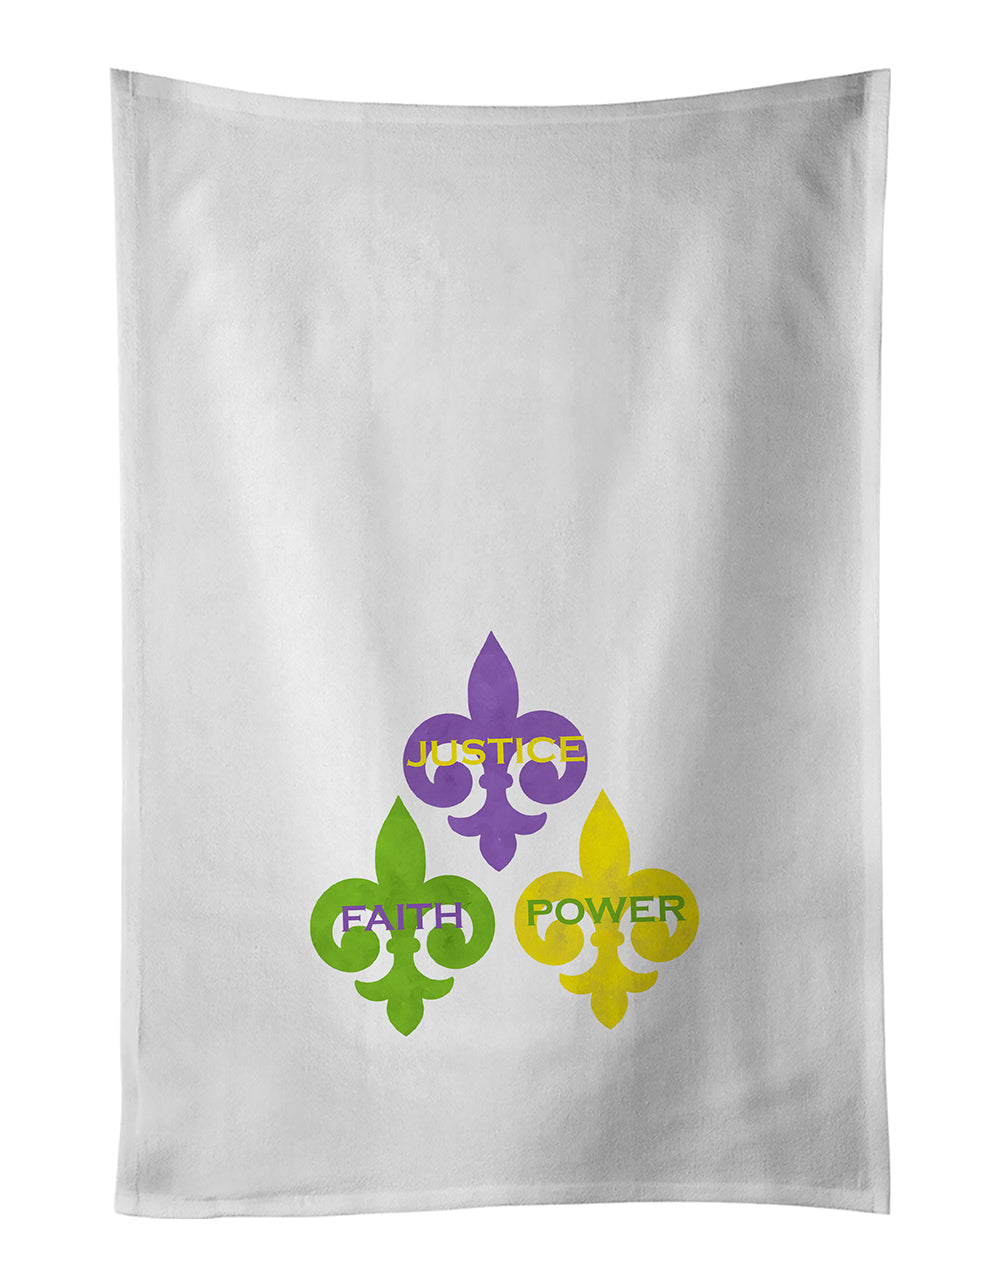 Buy this Justice Faith Power Mardi Gras White Kitchen Towel Set of 2 Dish Towels